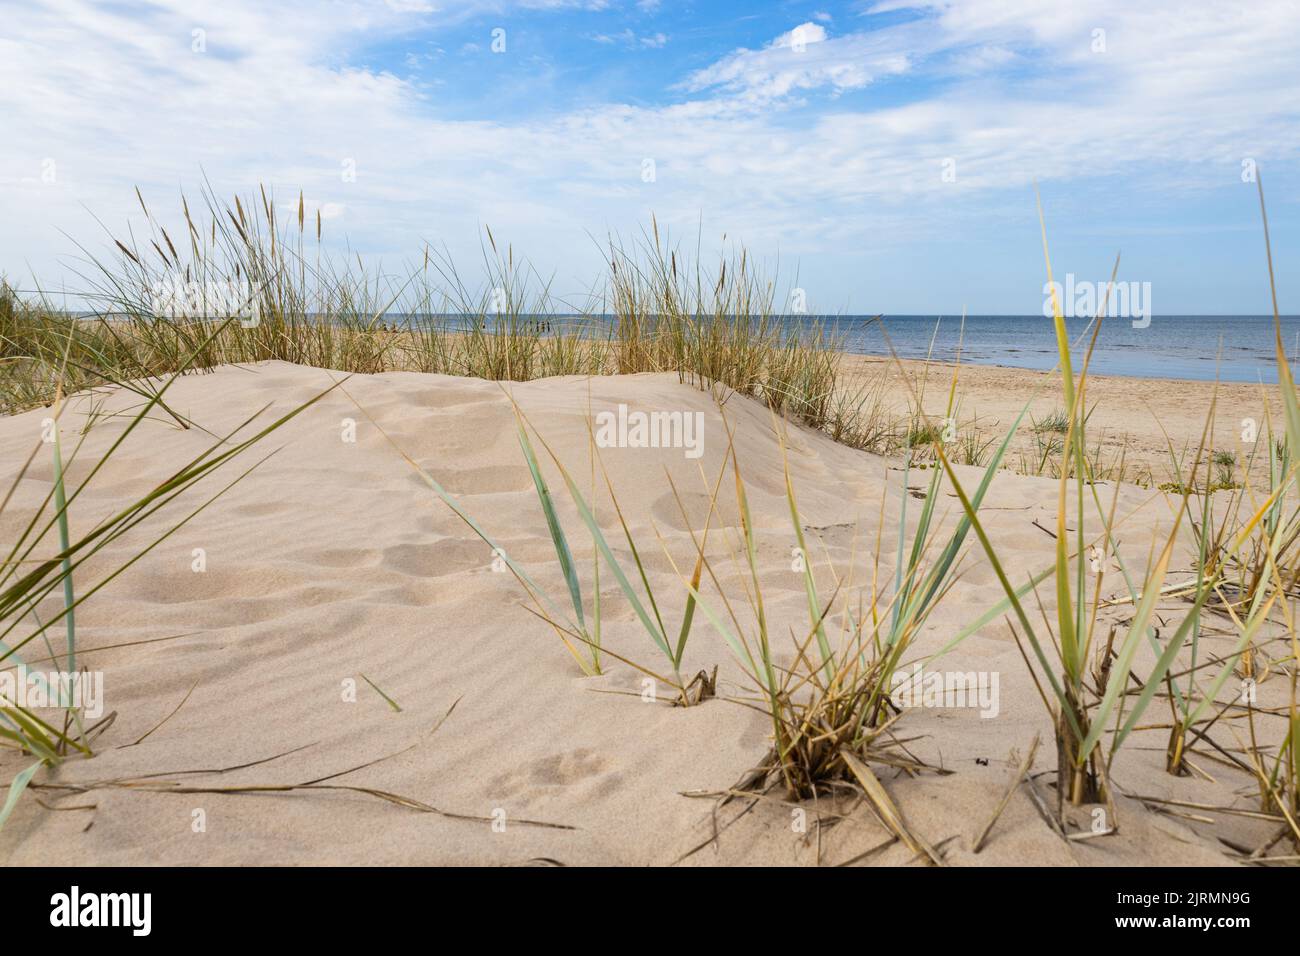 Sandy beach with dry and yellow grass, reeds, stalks, and blue sea with waves on the Baltic sea Stock Photo